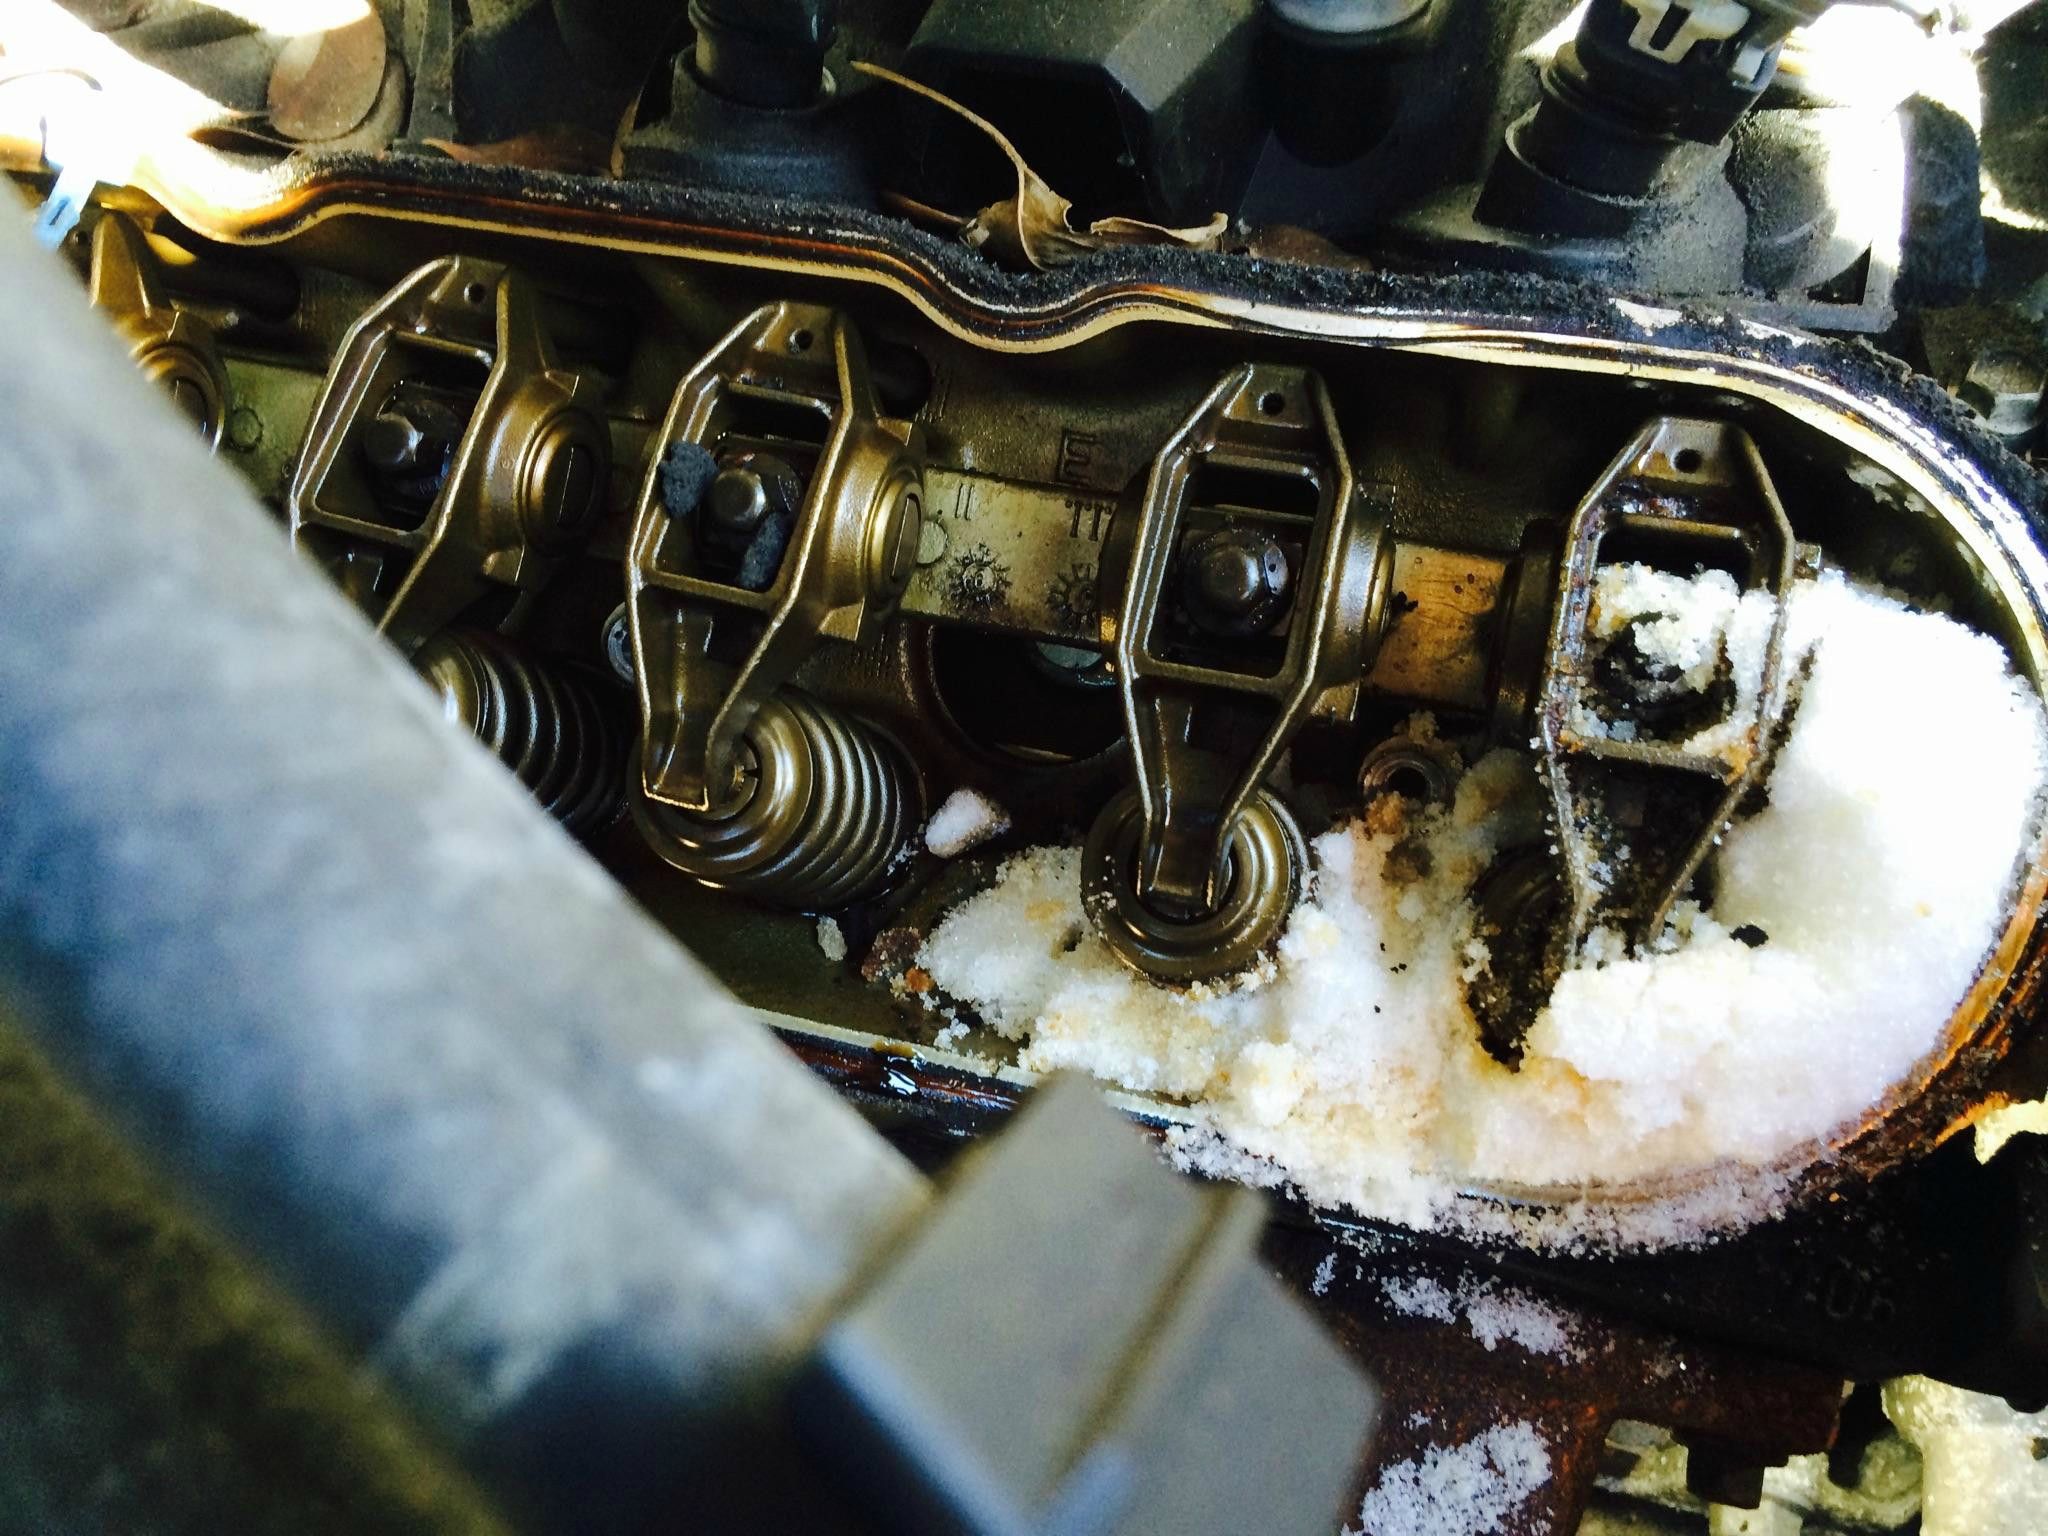 sugar piling up in engine